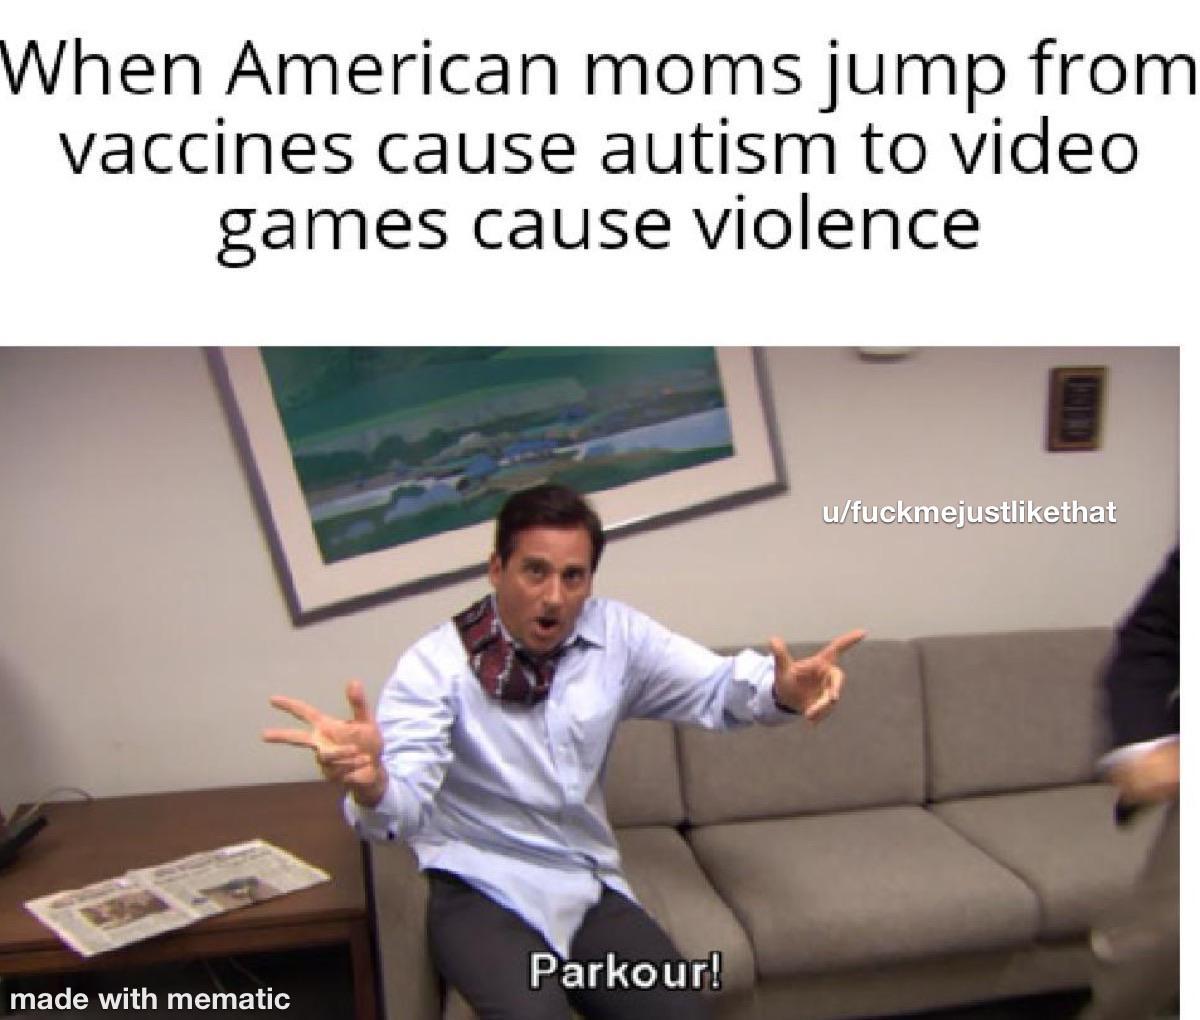 funny gaming memes - office parkour meme - When American moms jump from vaccines cause autism to video games cause violence ufuckmejustthat Parkour! made with mematic